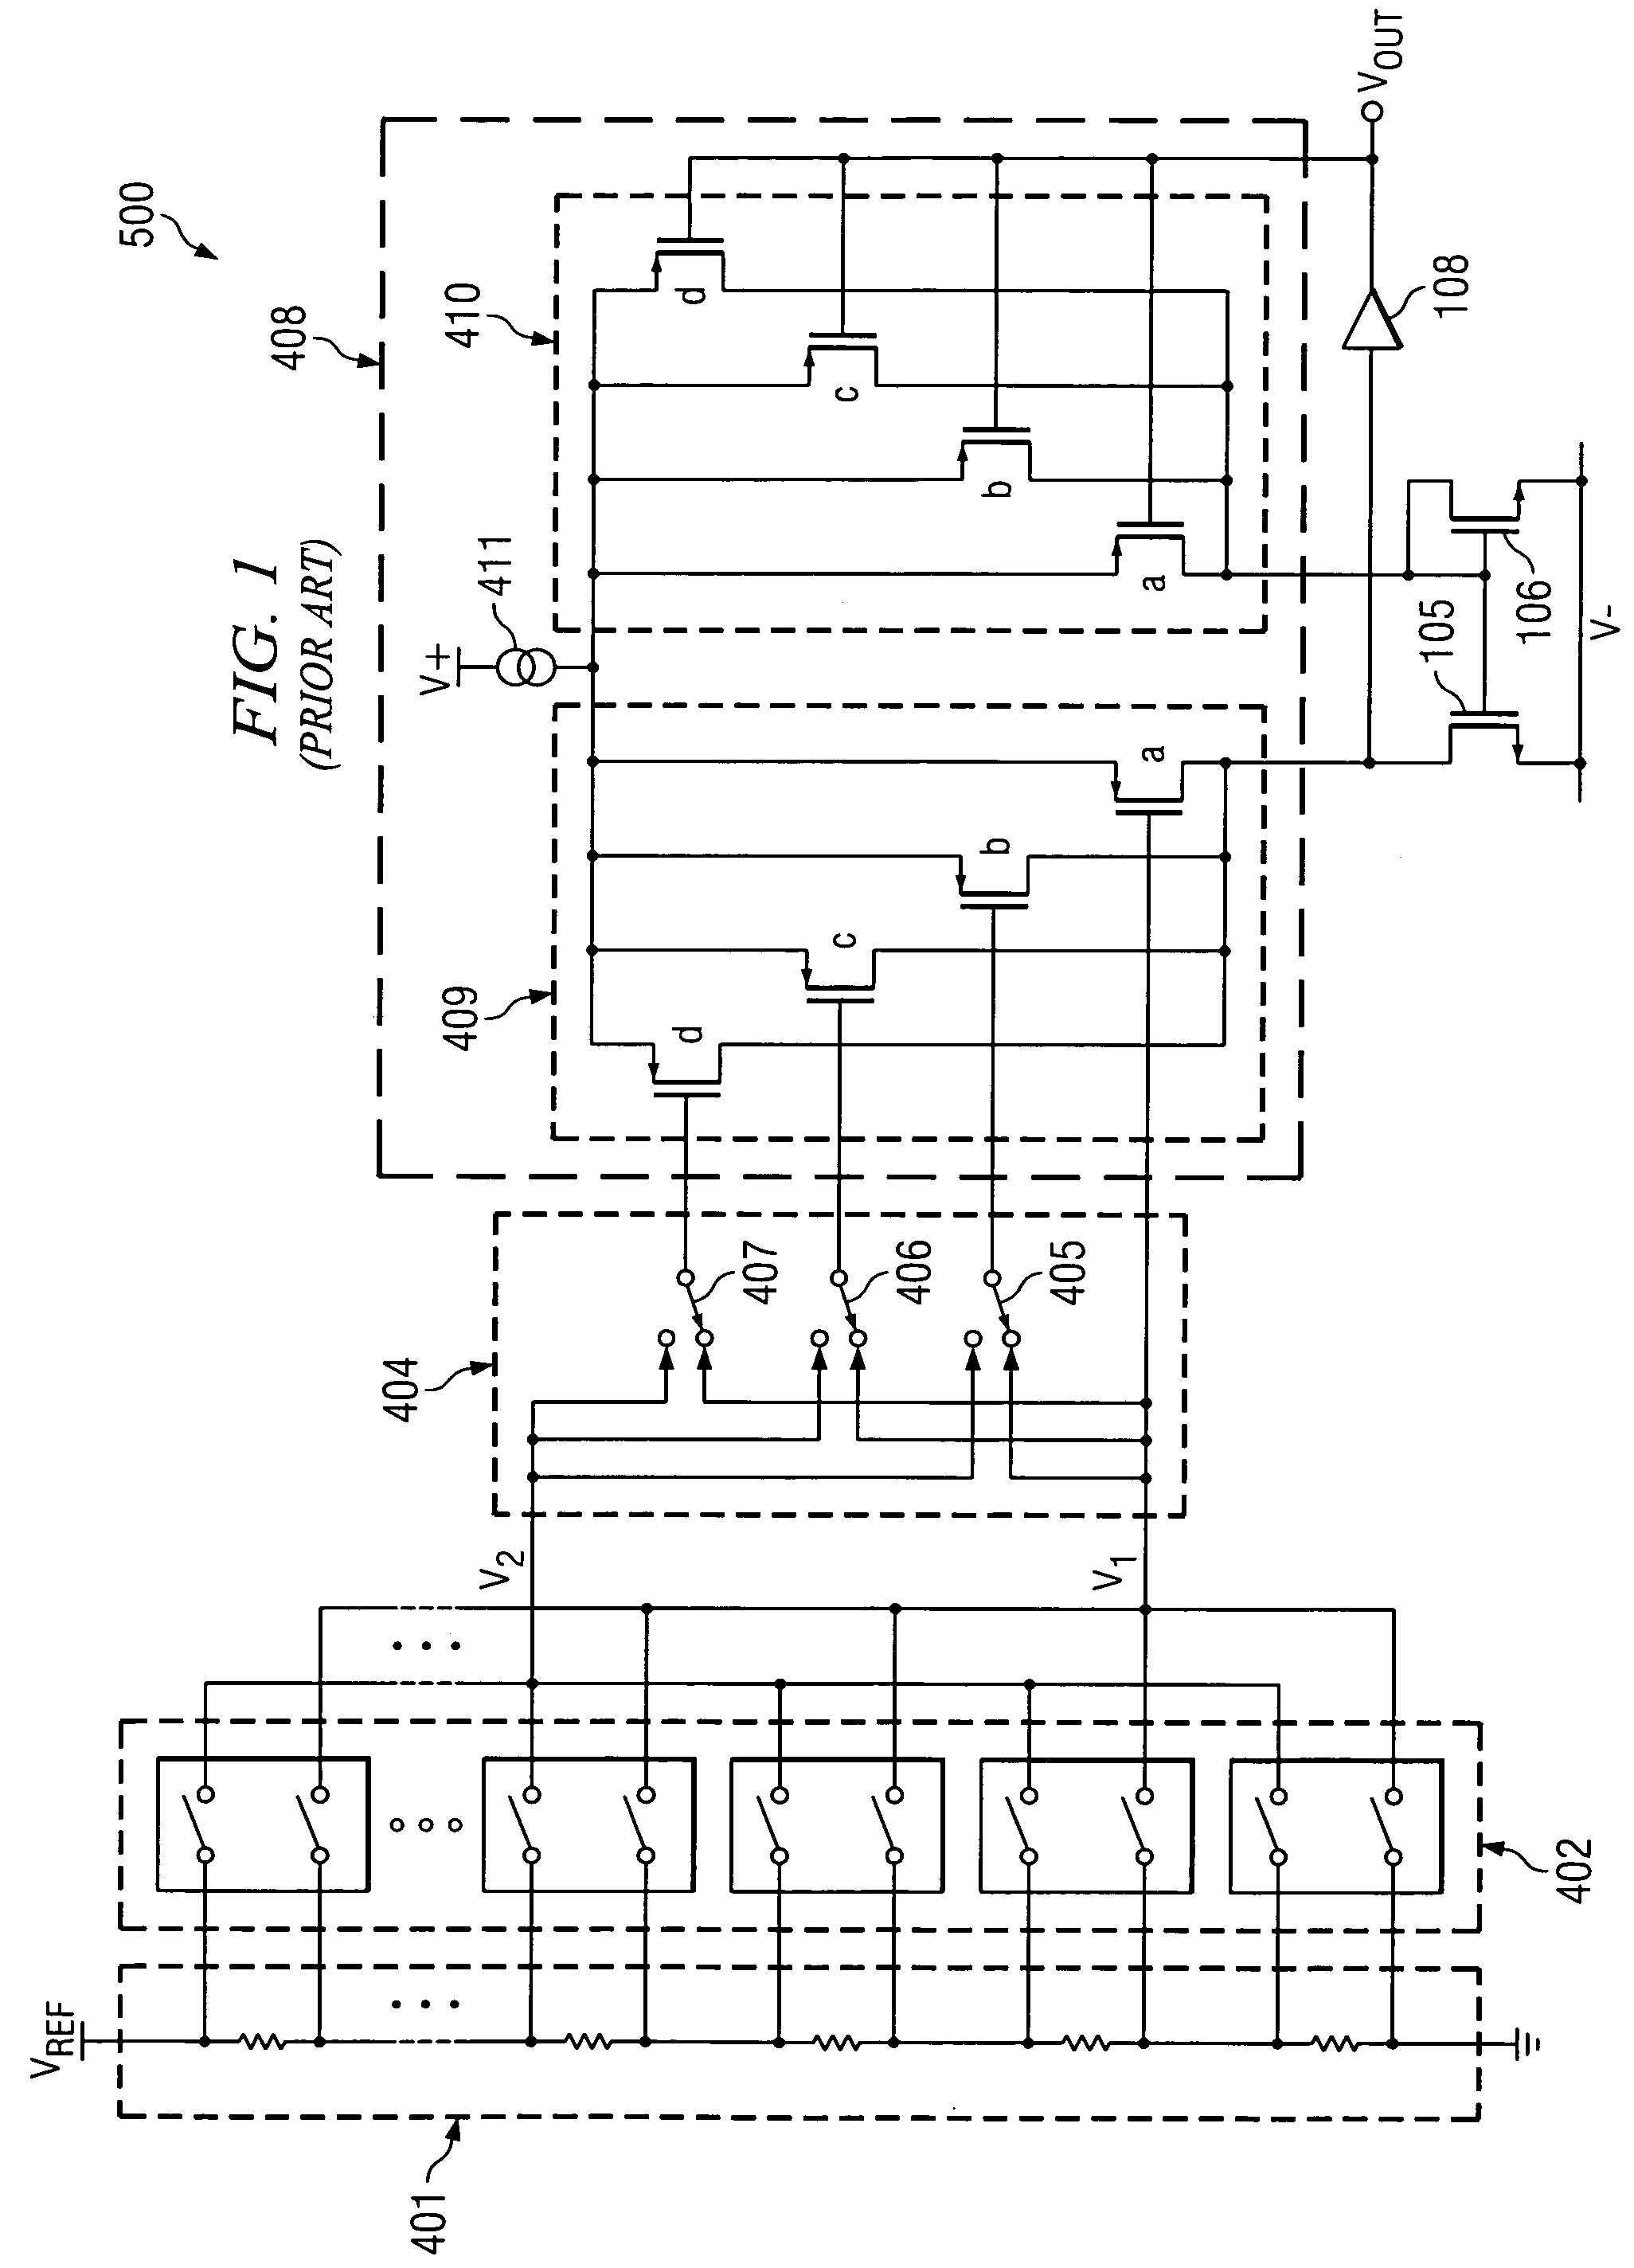 High-speed, high-resolution voltage output digital-to-analog converter and method